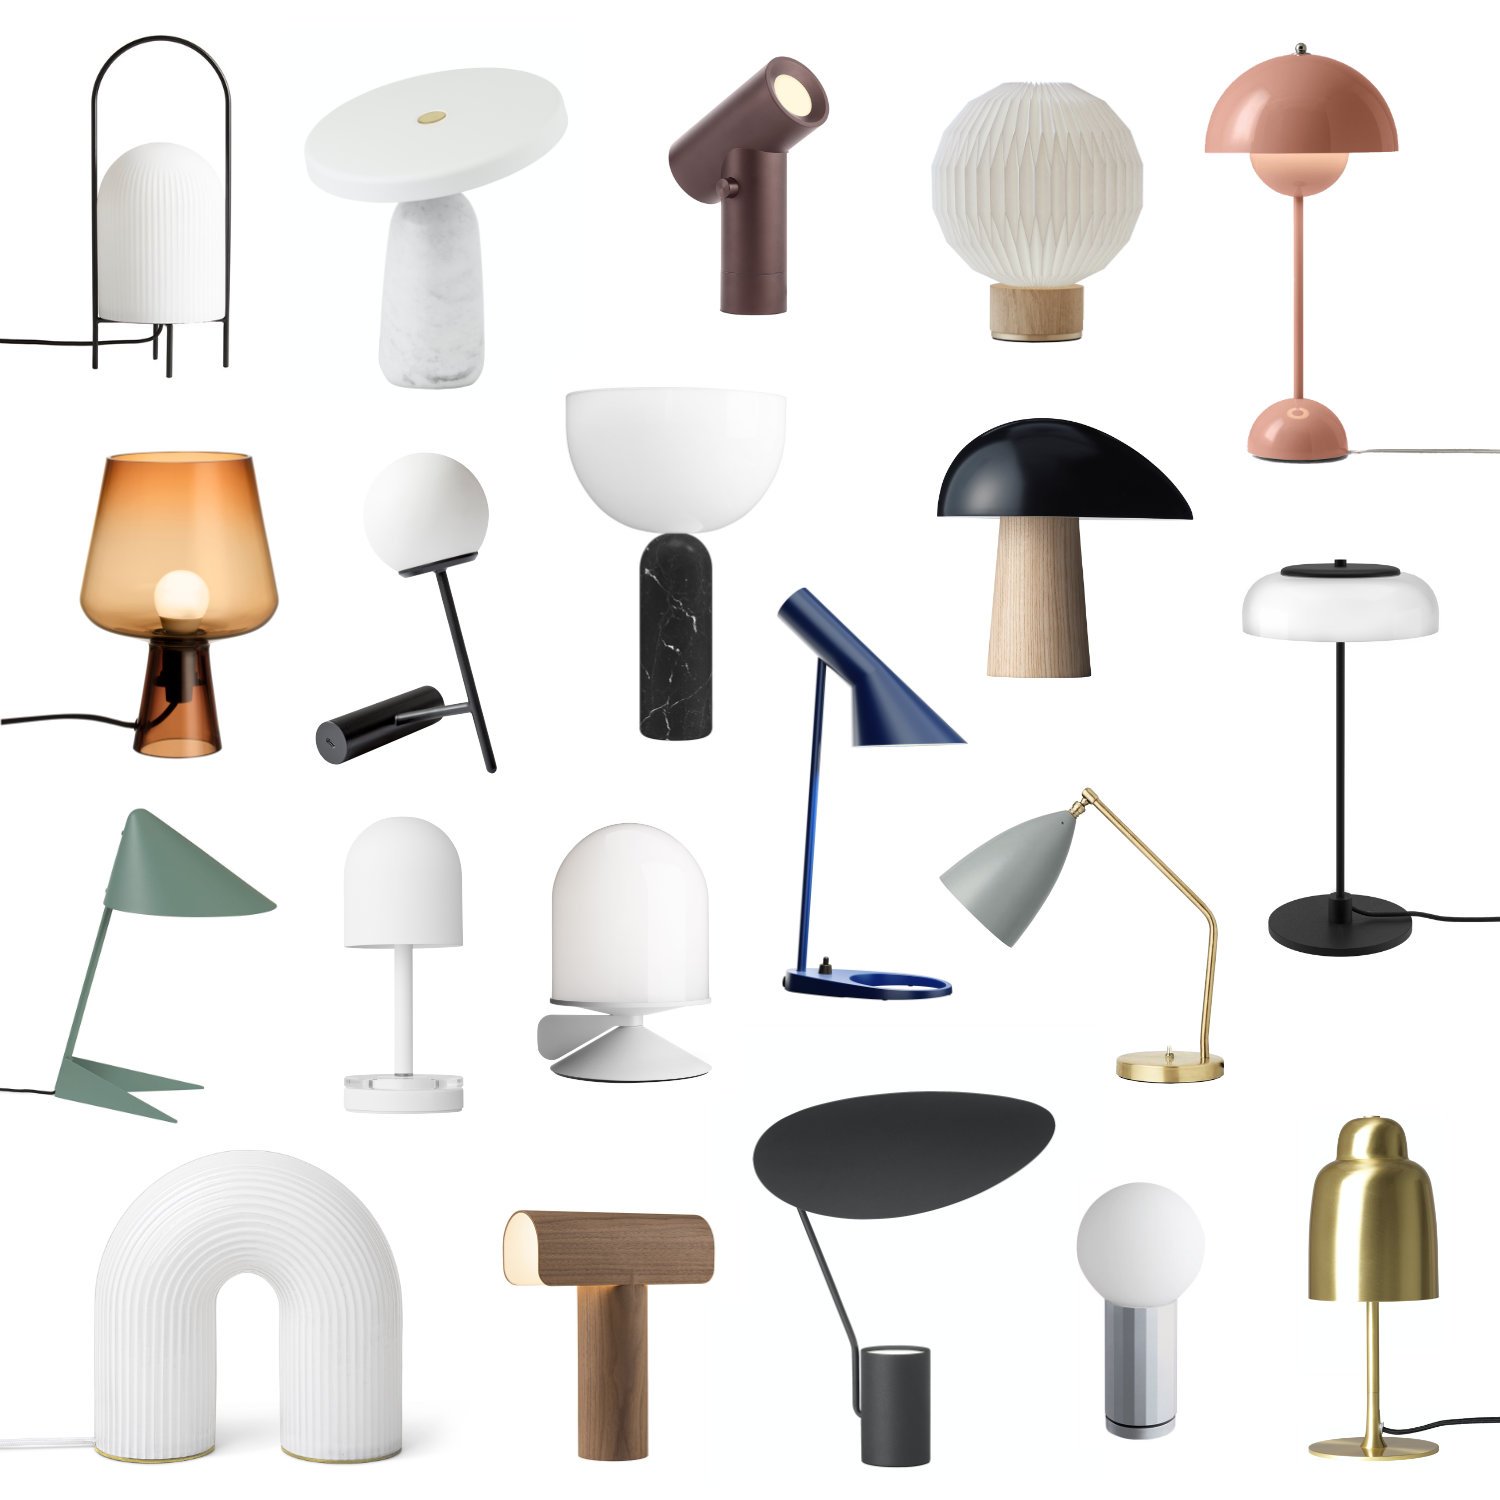 What are architectural table lamps